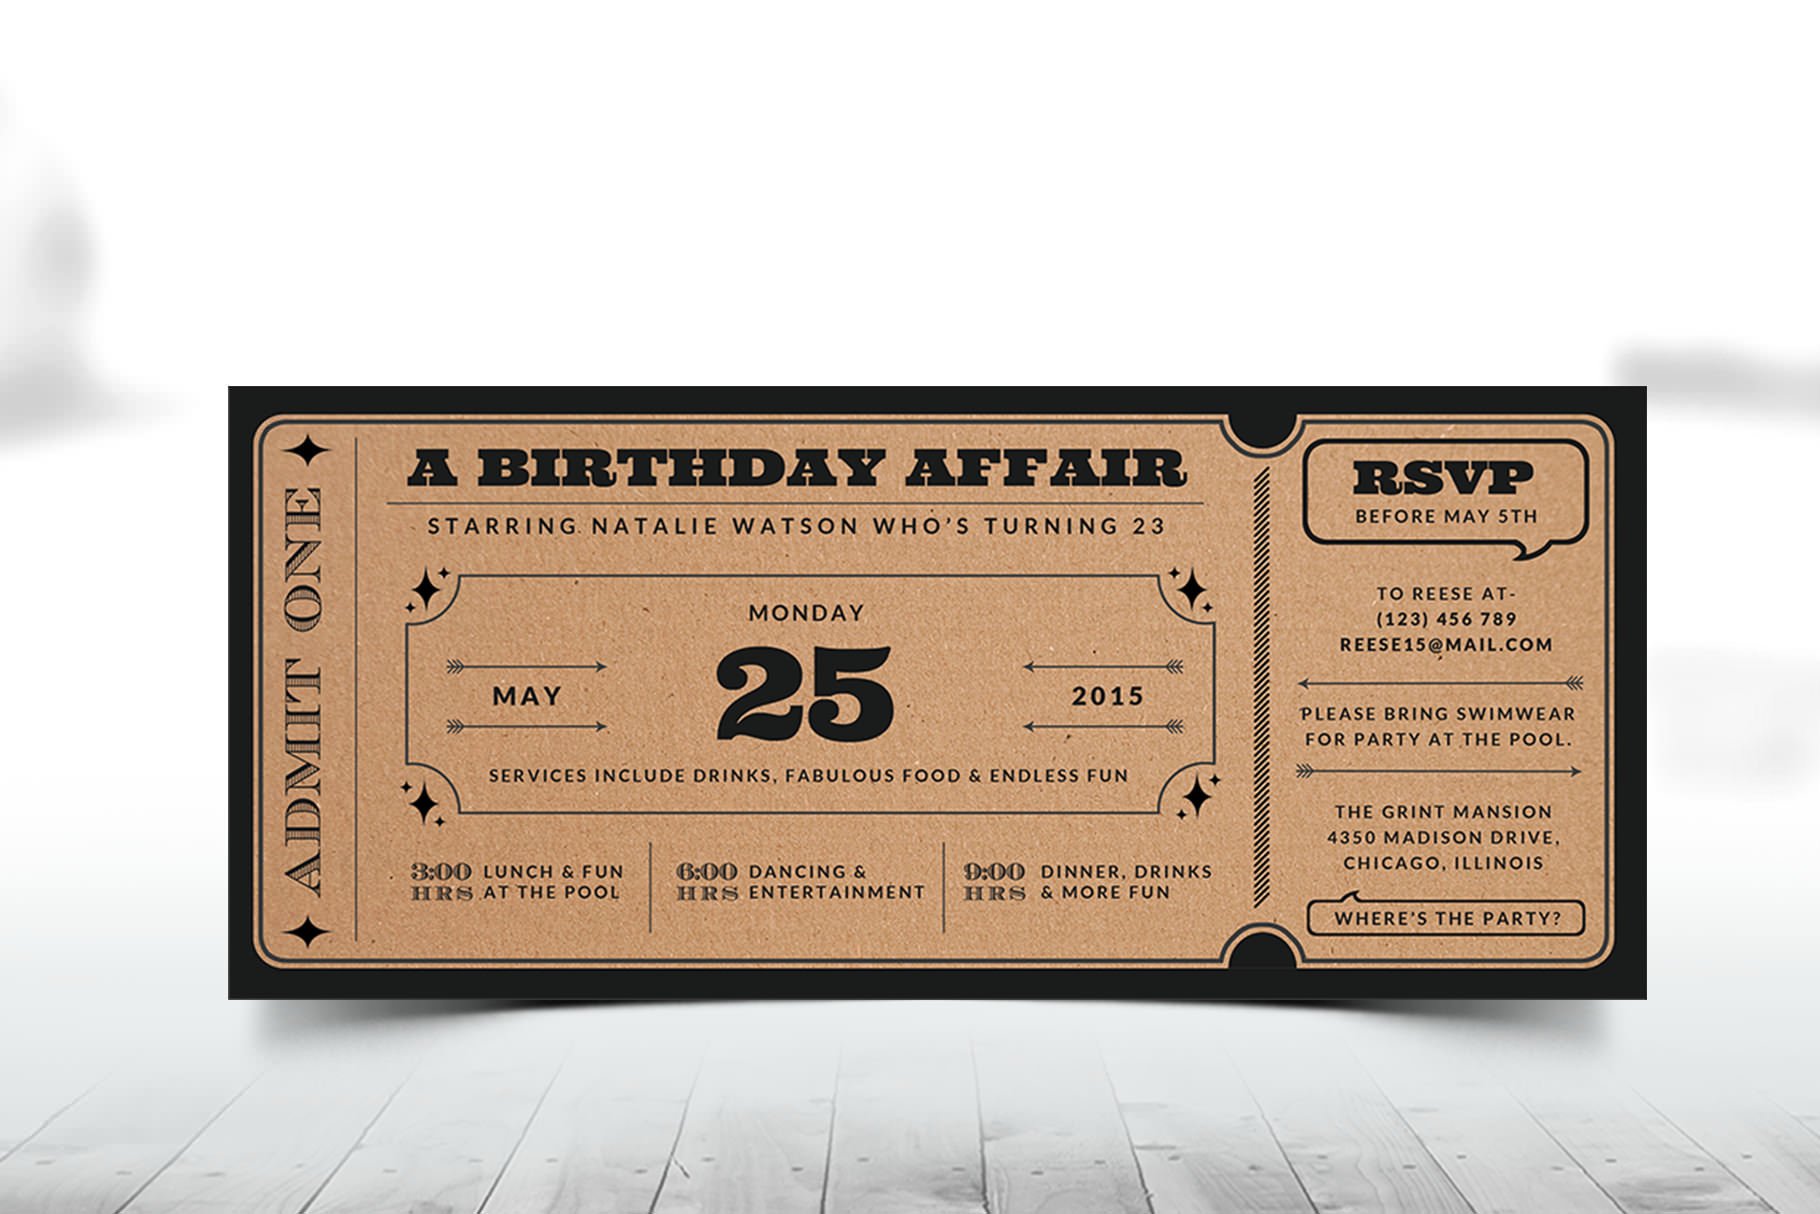 Birthday Ticket Invitation Pack cover image.